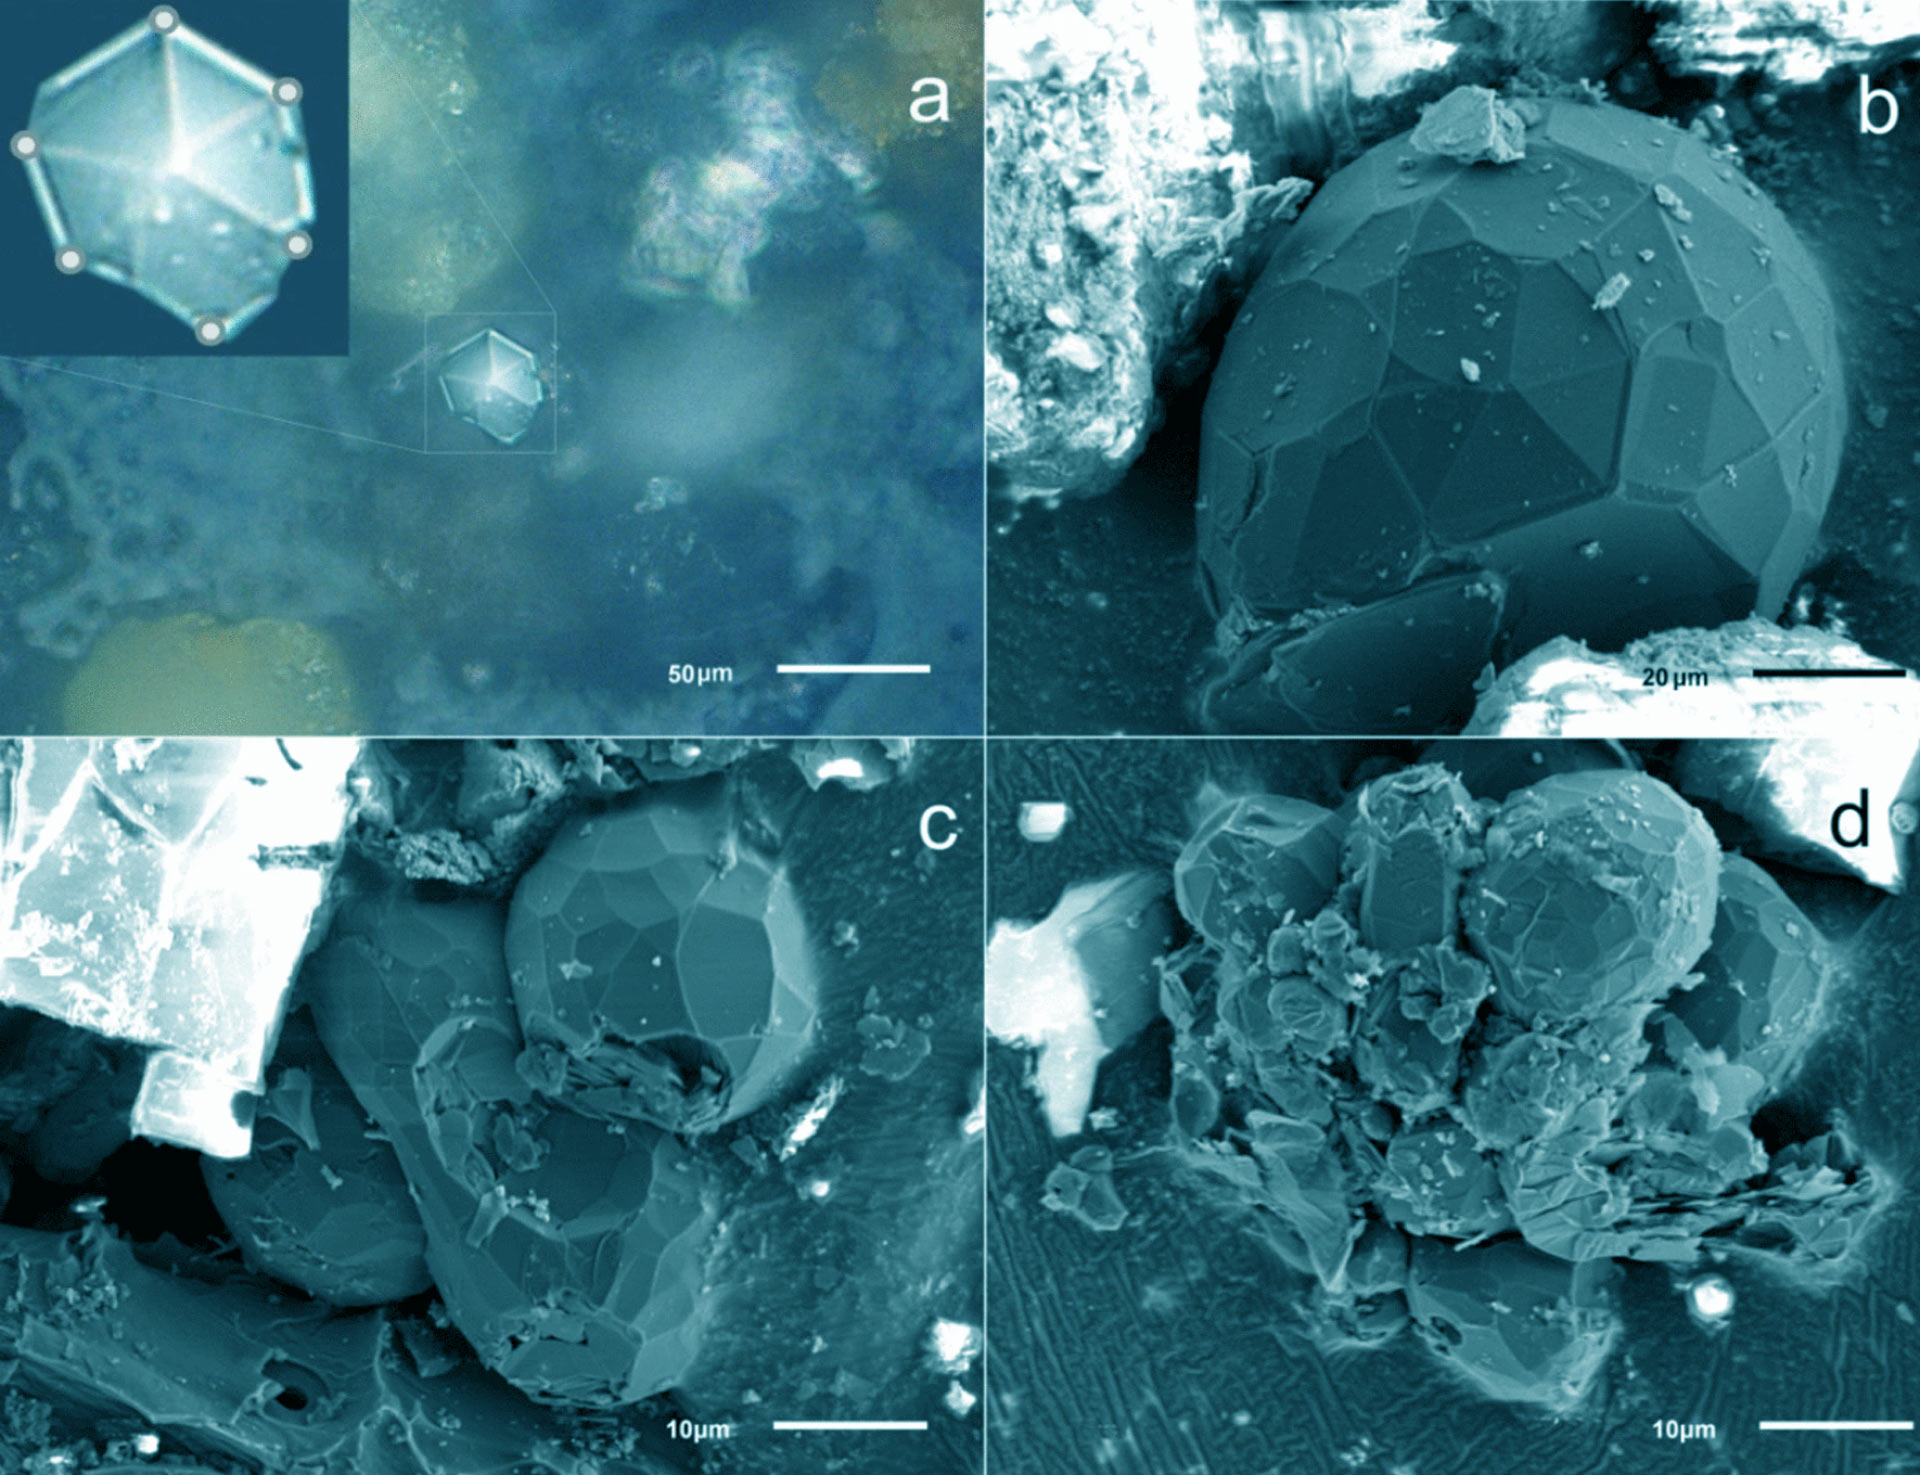 This photograph shows both Optical (a) and SEM (b-d) views of the carbon crystals embedded in the meteoritic dust. Image credit: Taskaev et al., doi: 10.1140/epjp/s13360-022-02768-7.